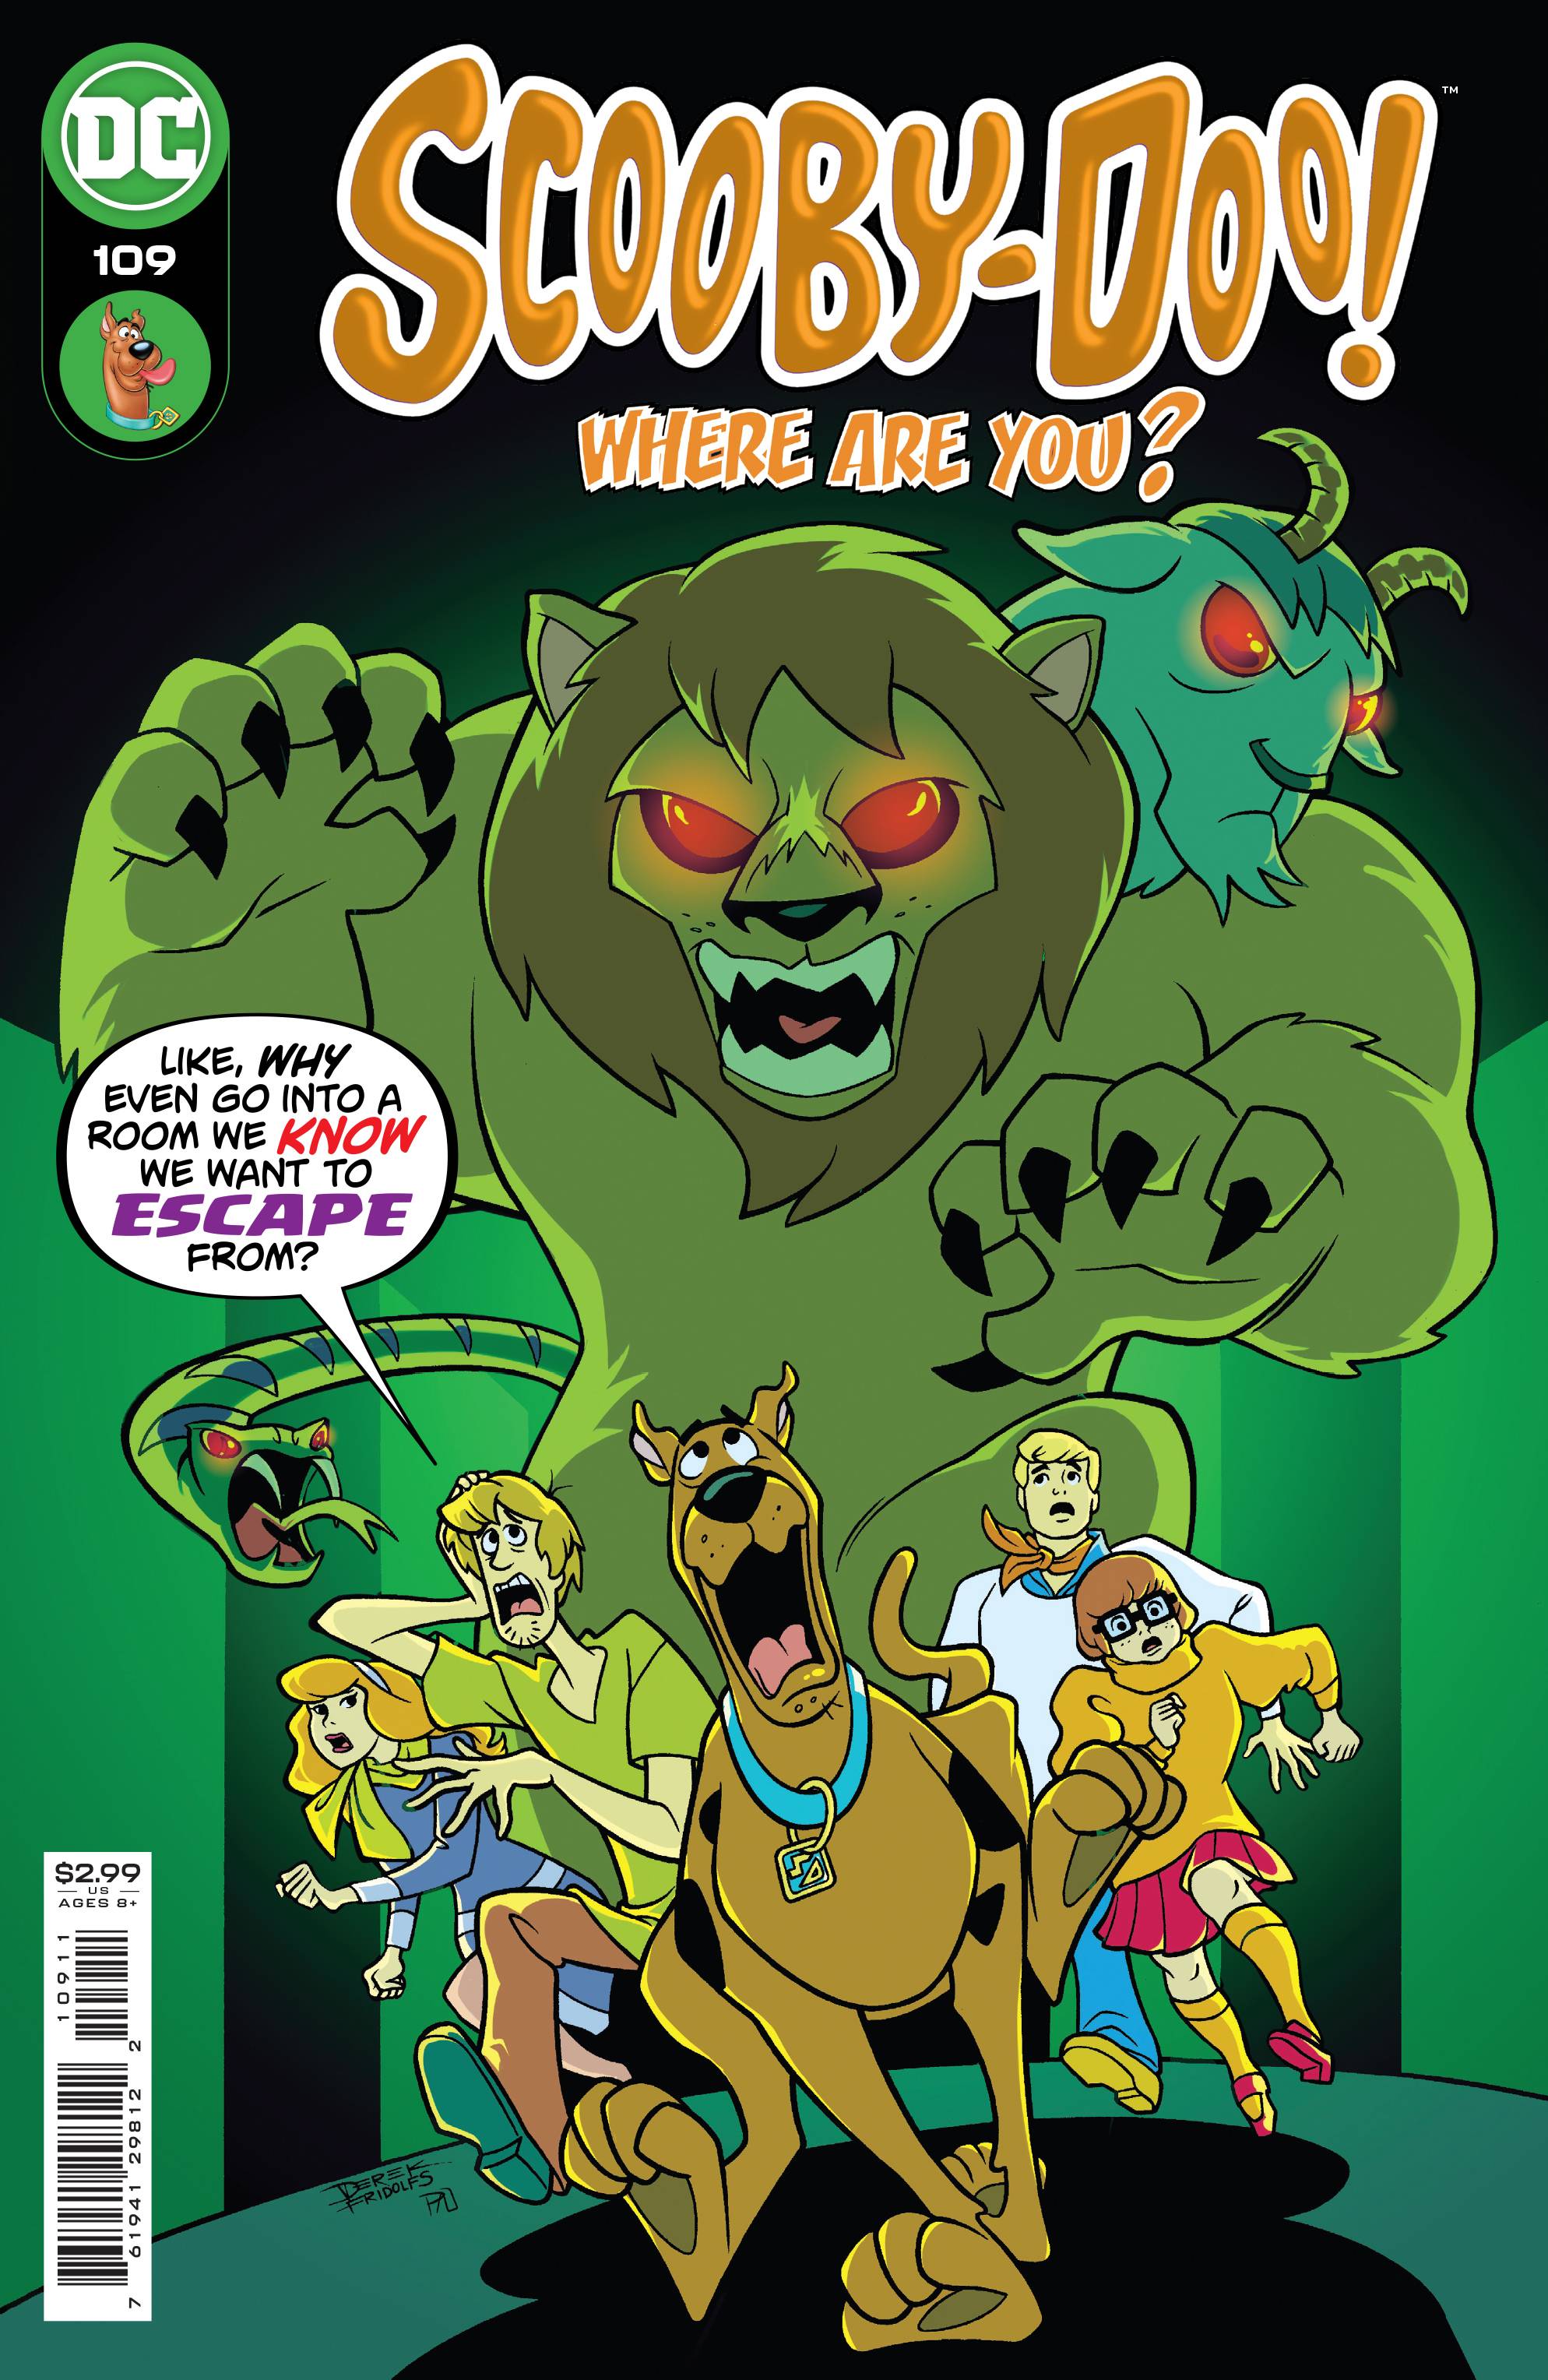 SCOOBY DOO WHERE ARE YOU #109 | Game Master's Emporium (The New GME)